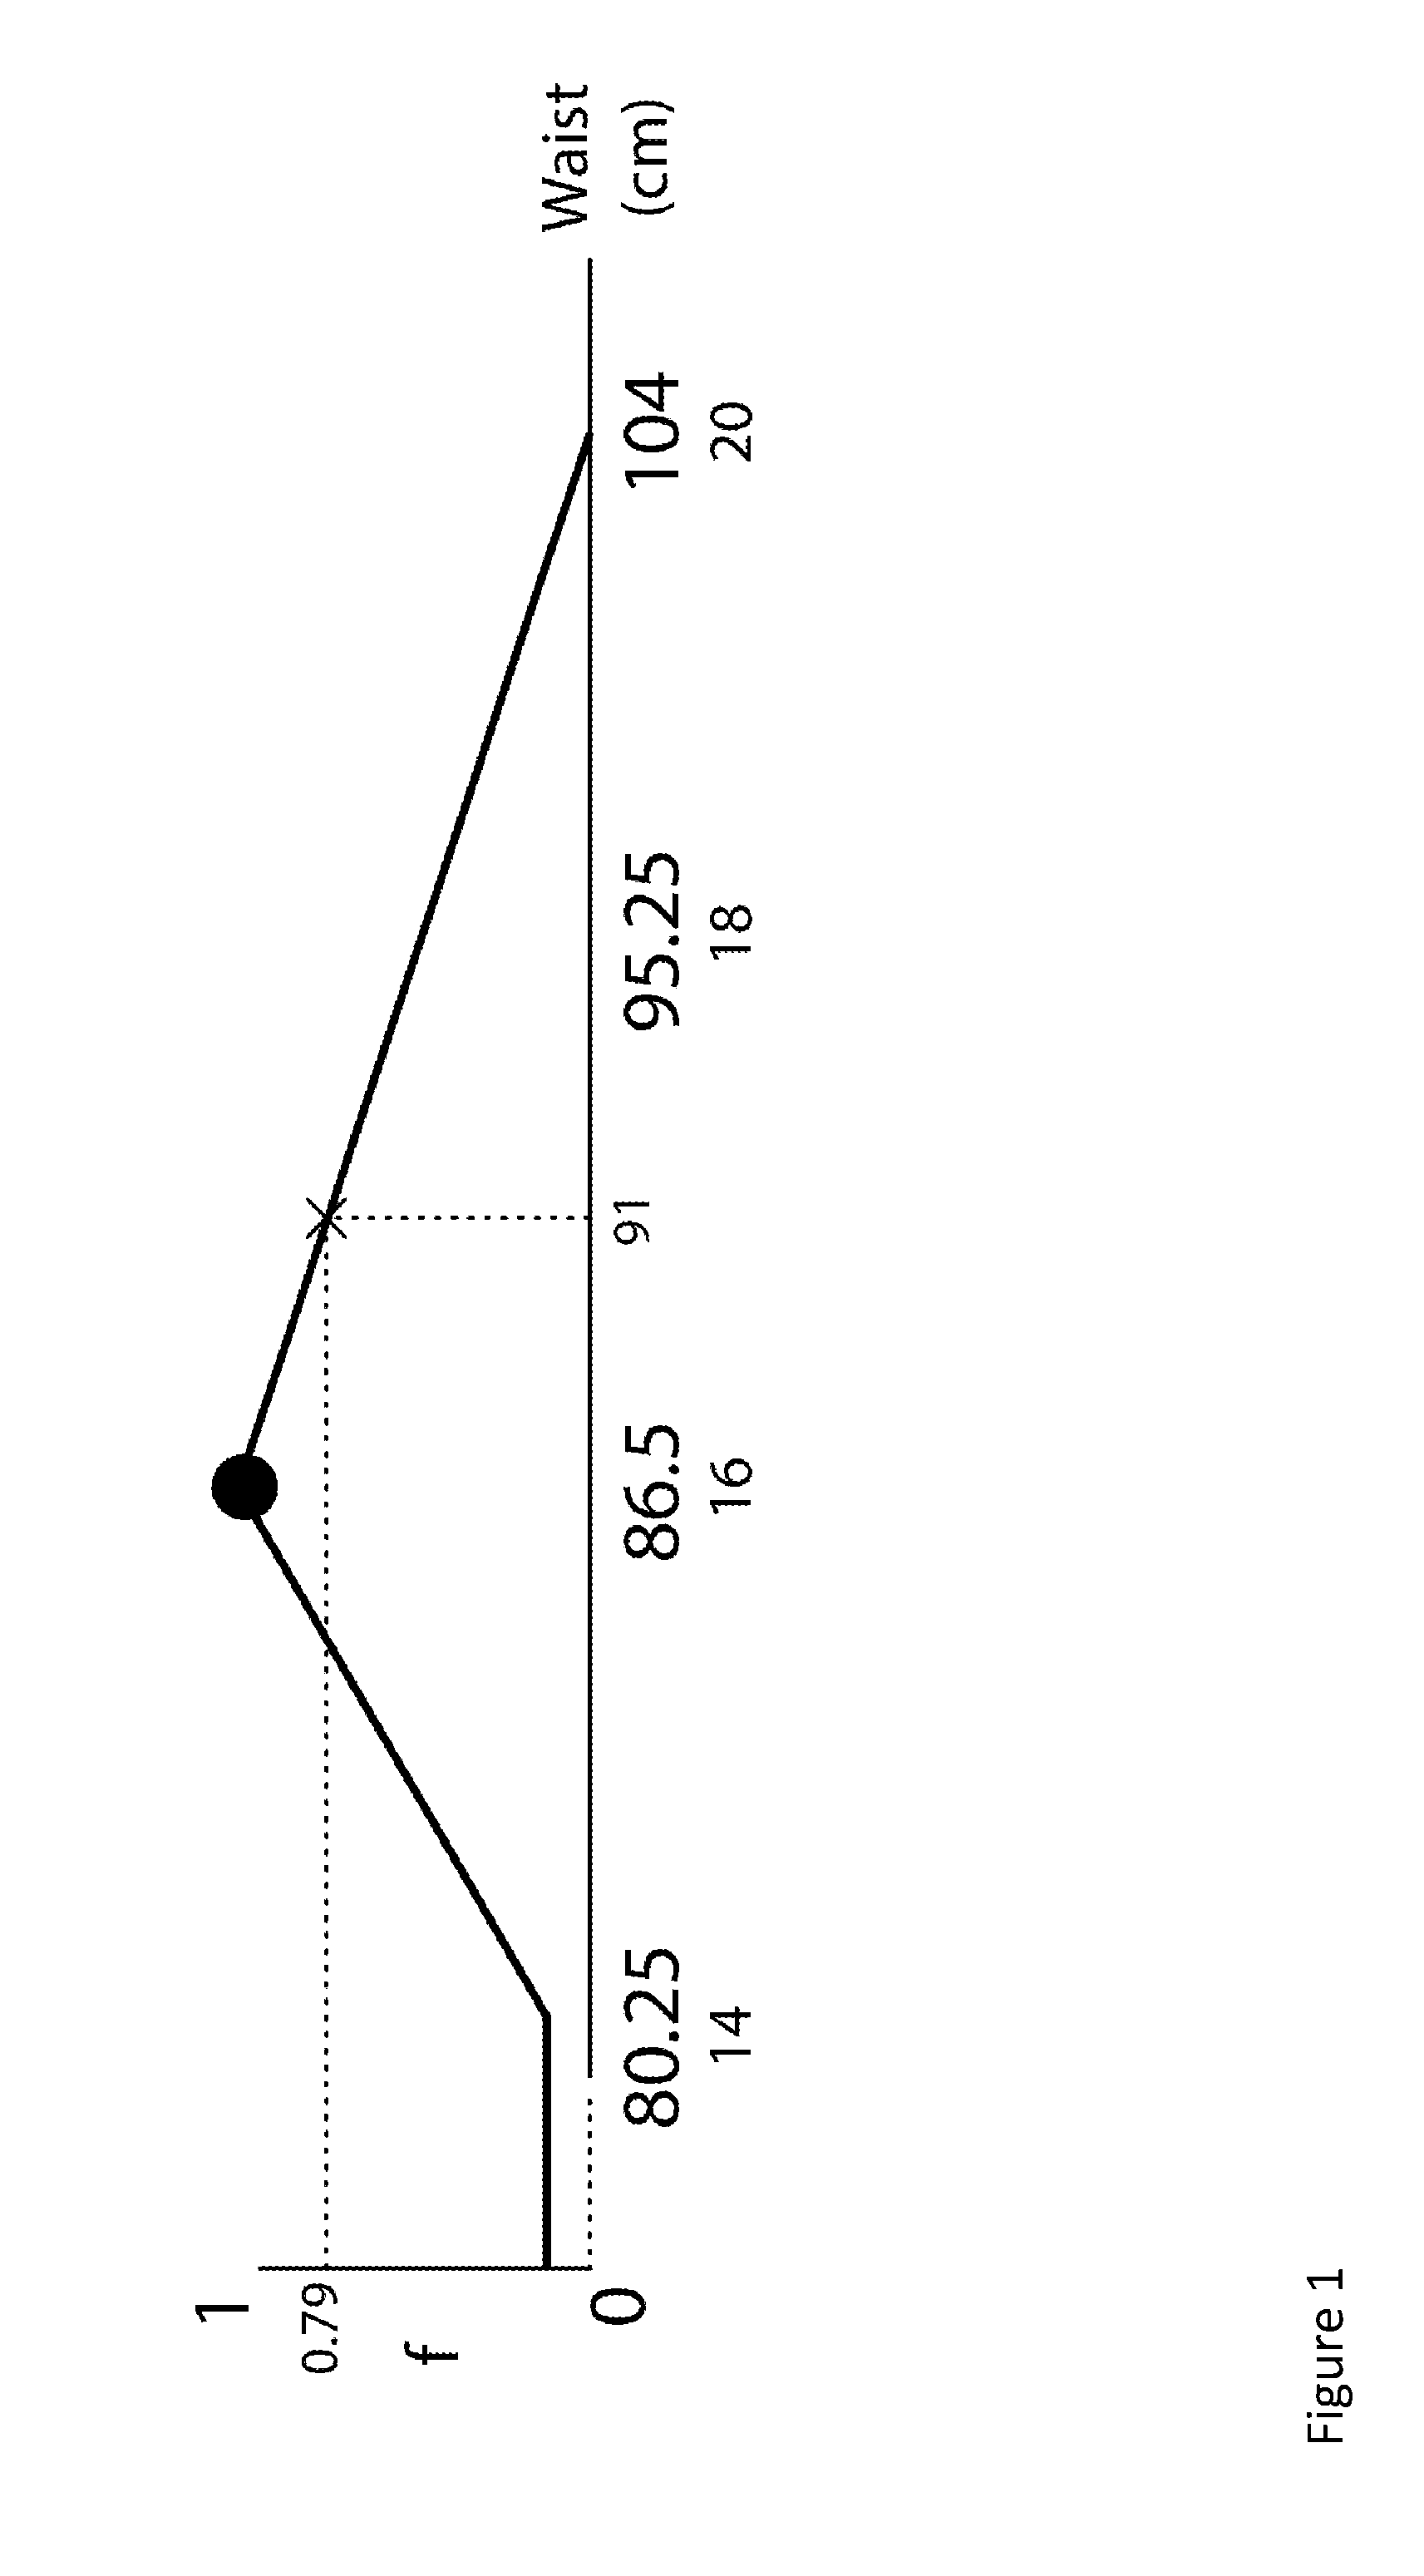 Garment size recommendation and fit analysis system and method